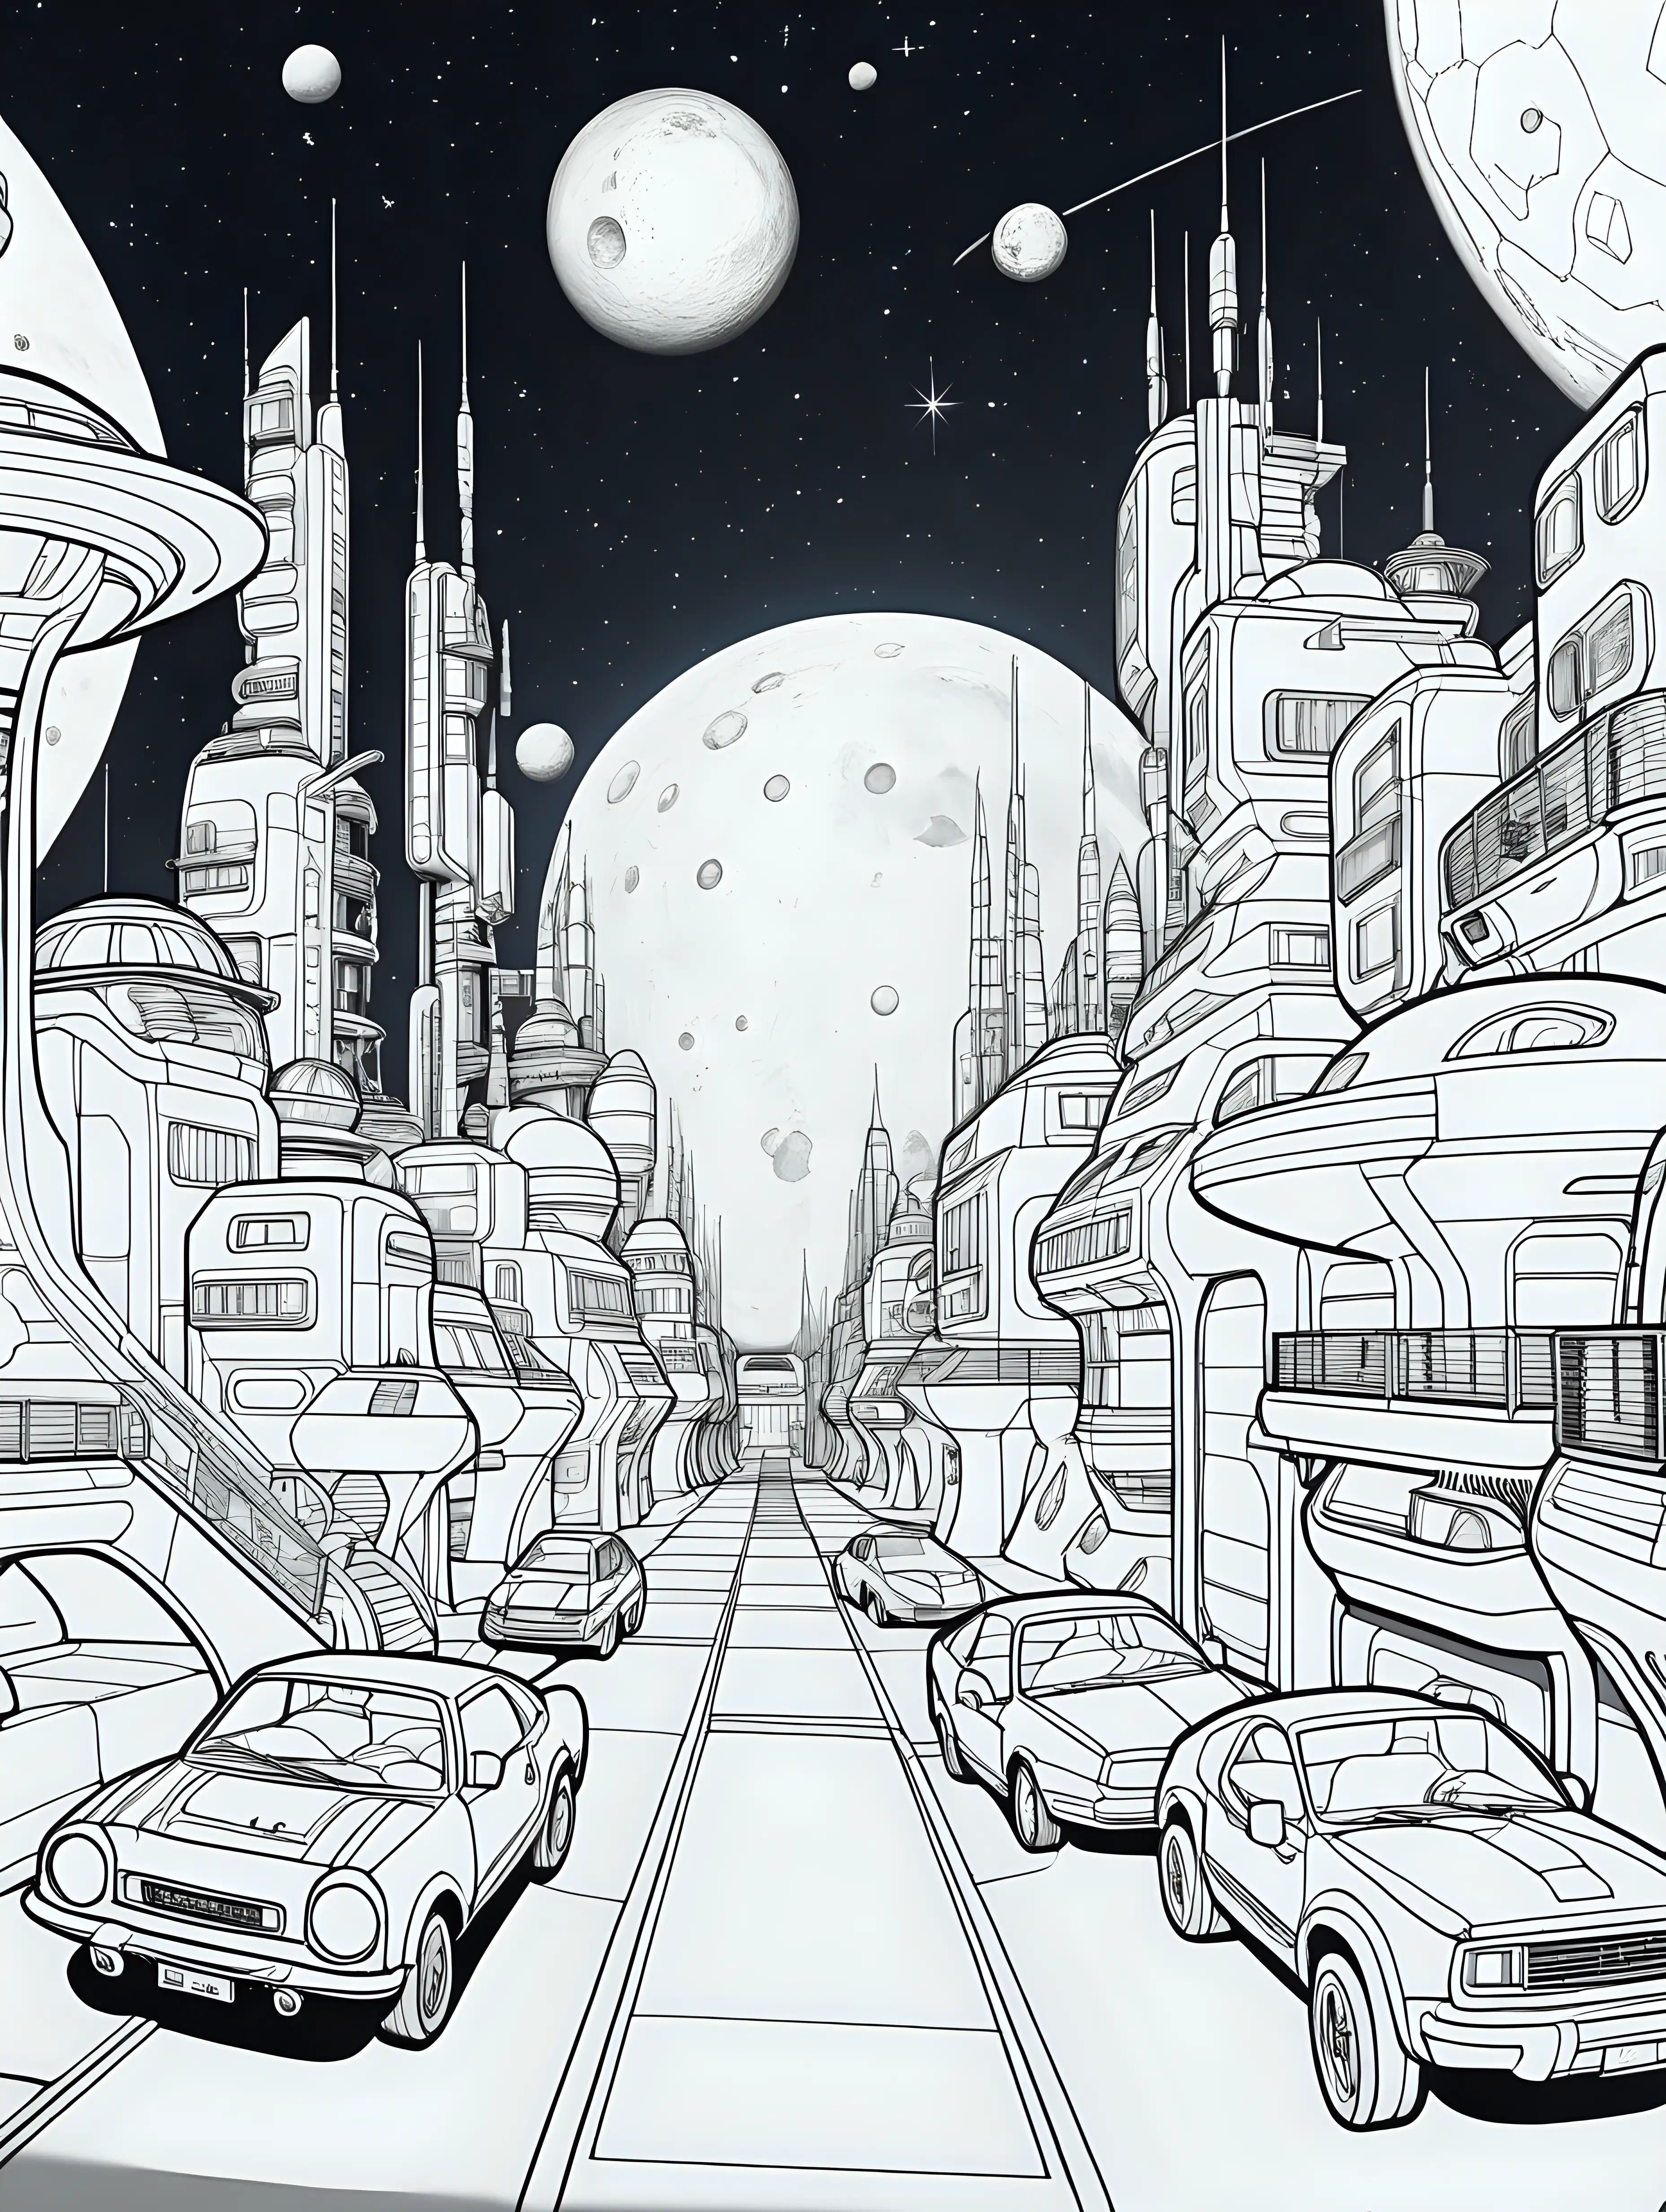 Futuristic Space Colony Coloring Page for Young Artists